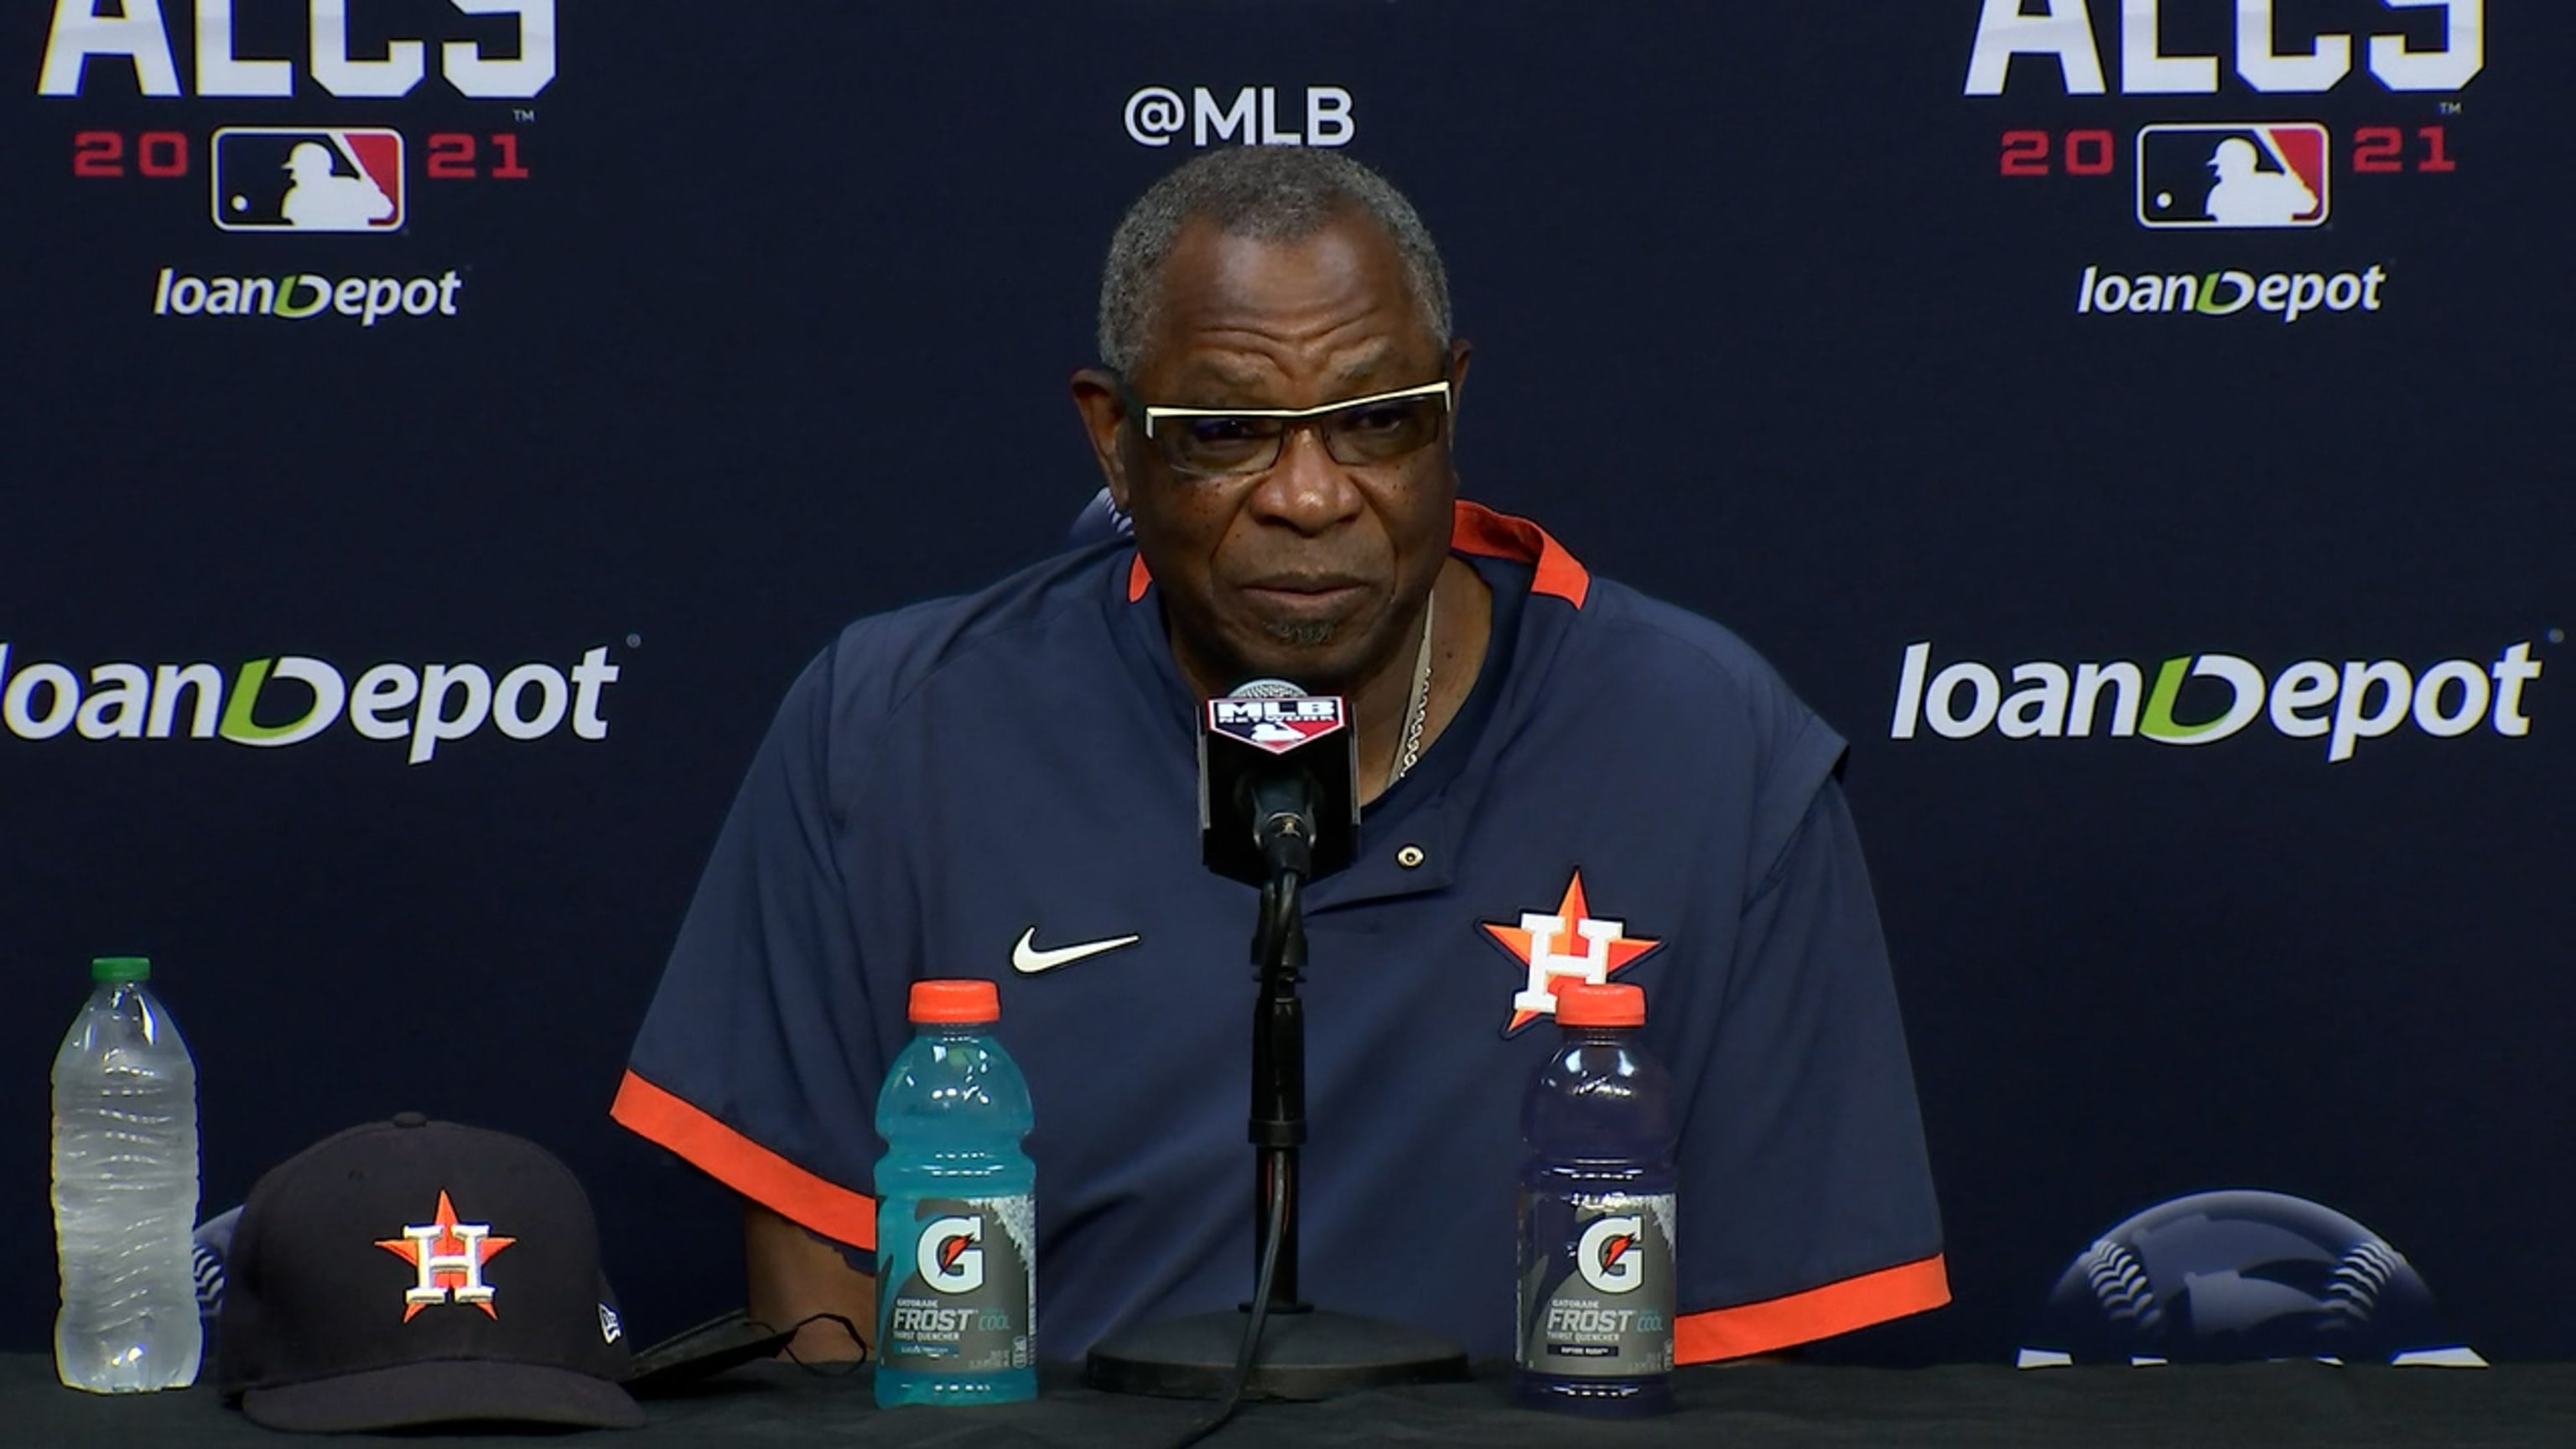 Dusty Baker on Game 3 at Fenway